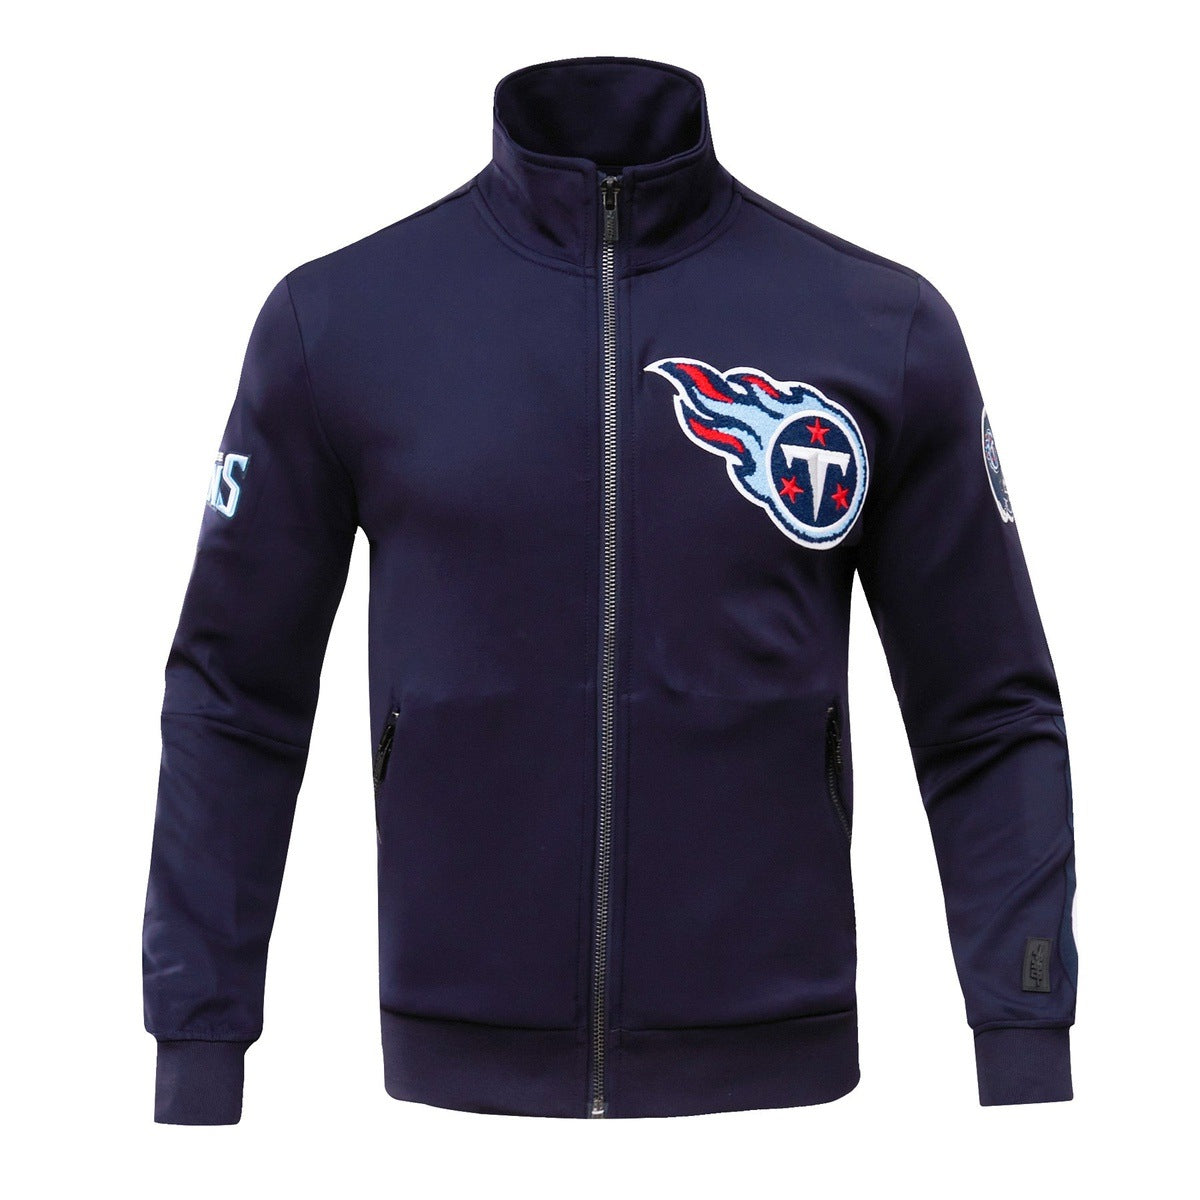 TENNESSEE TITANS CLASSIC DK TRACK JACKET (MIDNIGHT NAVY)